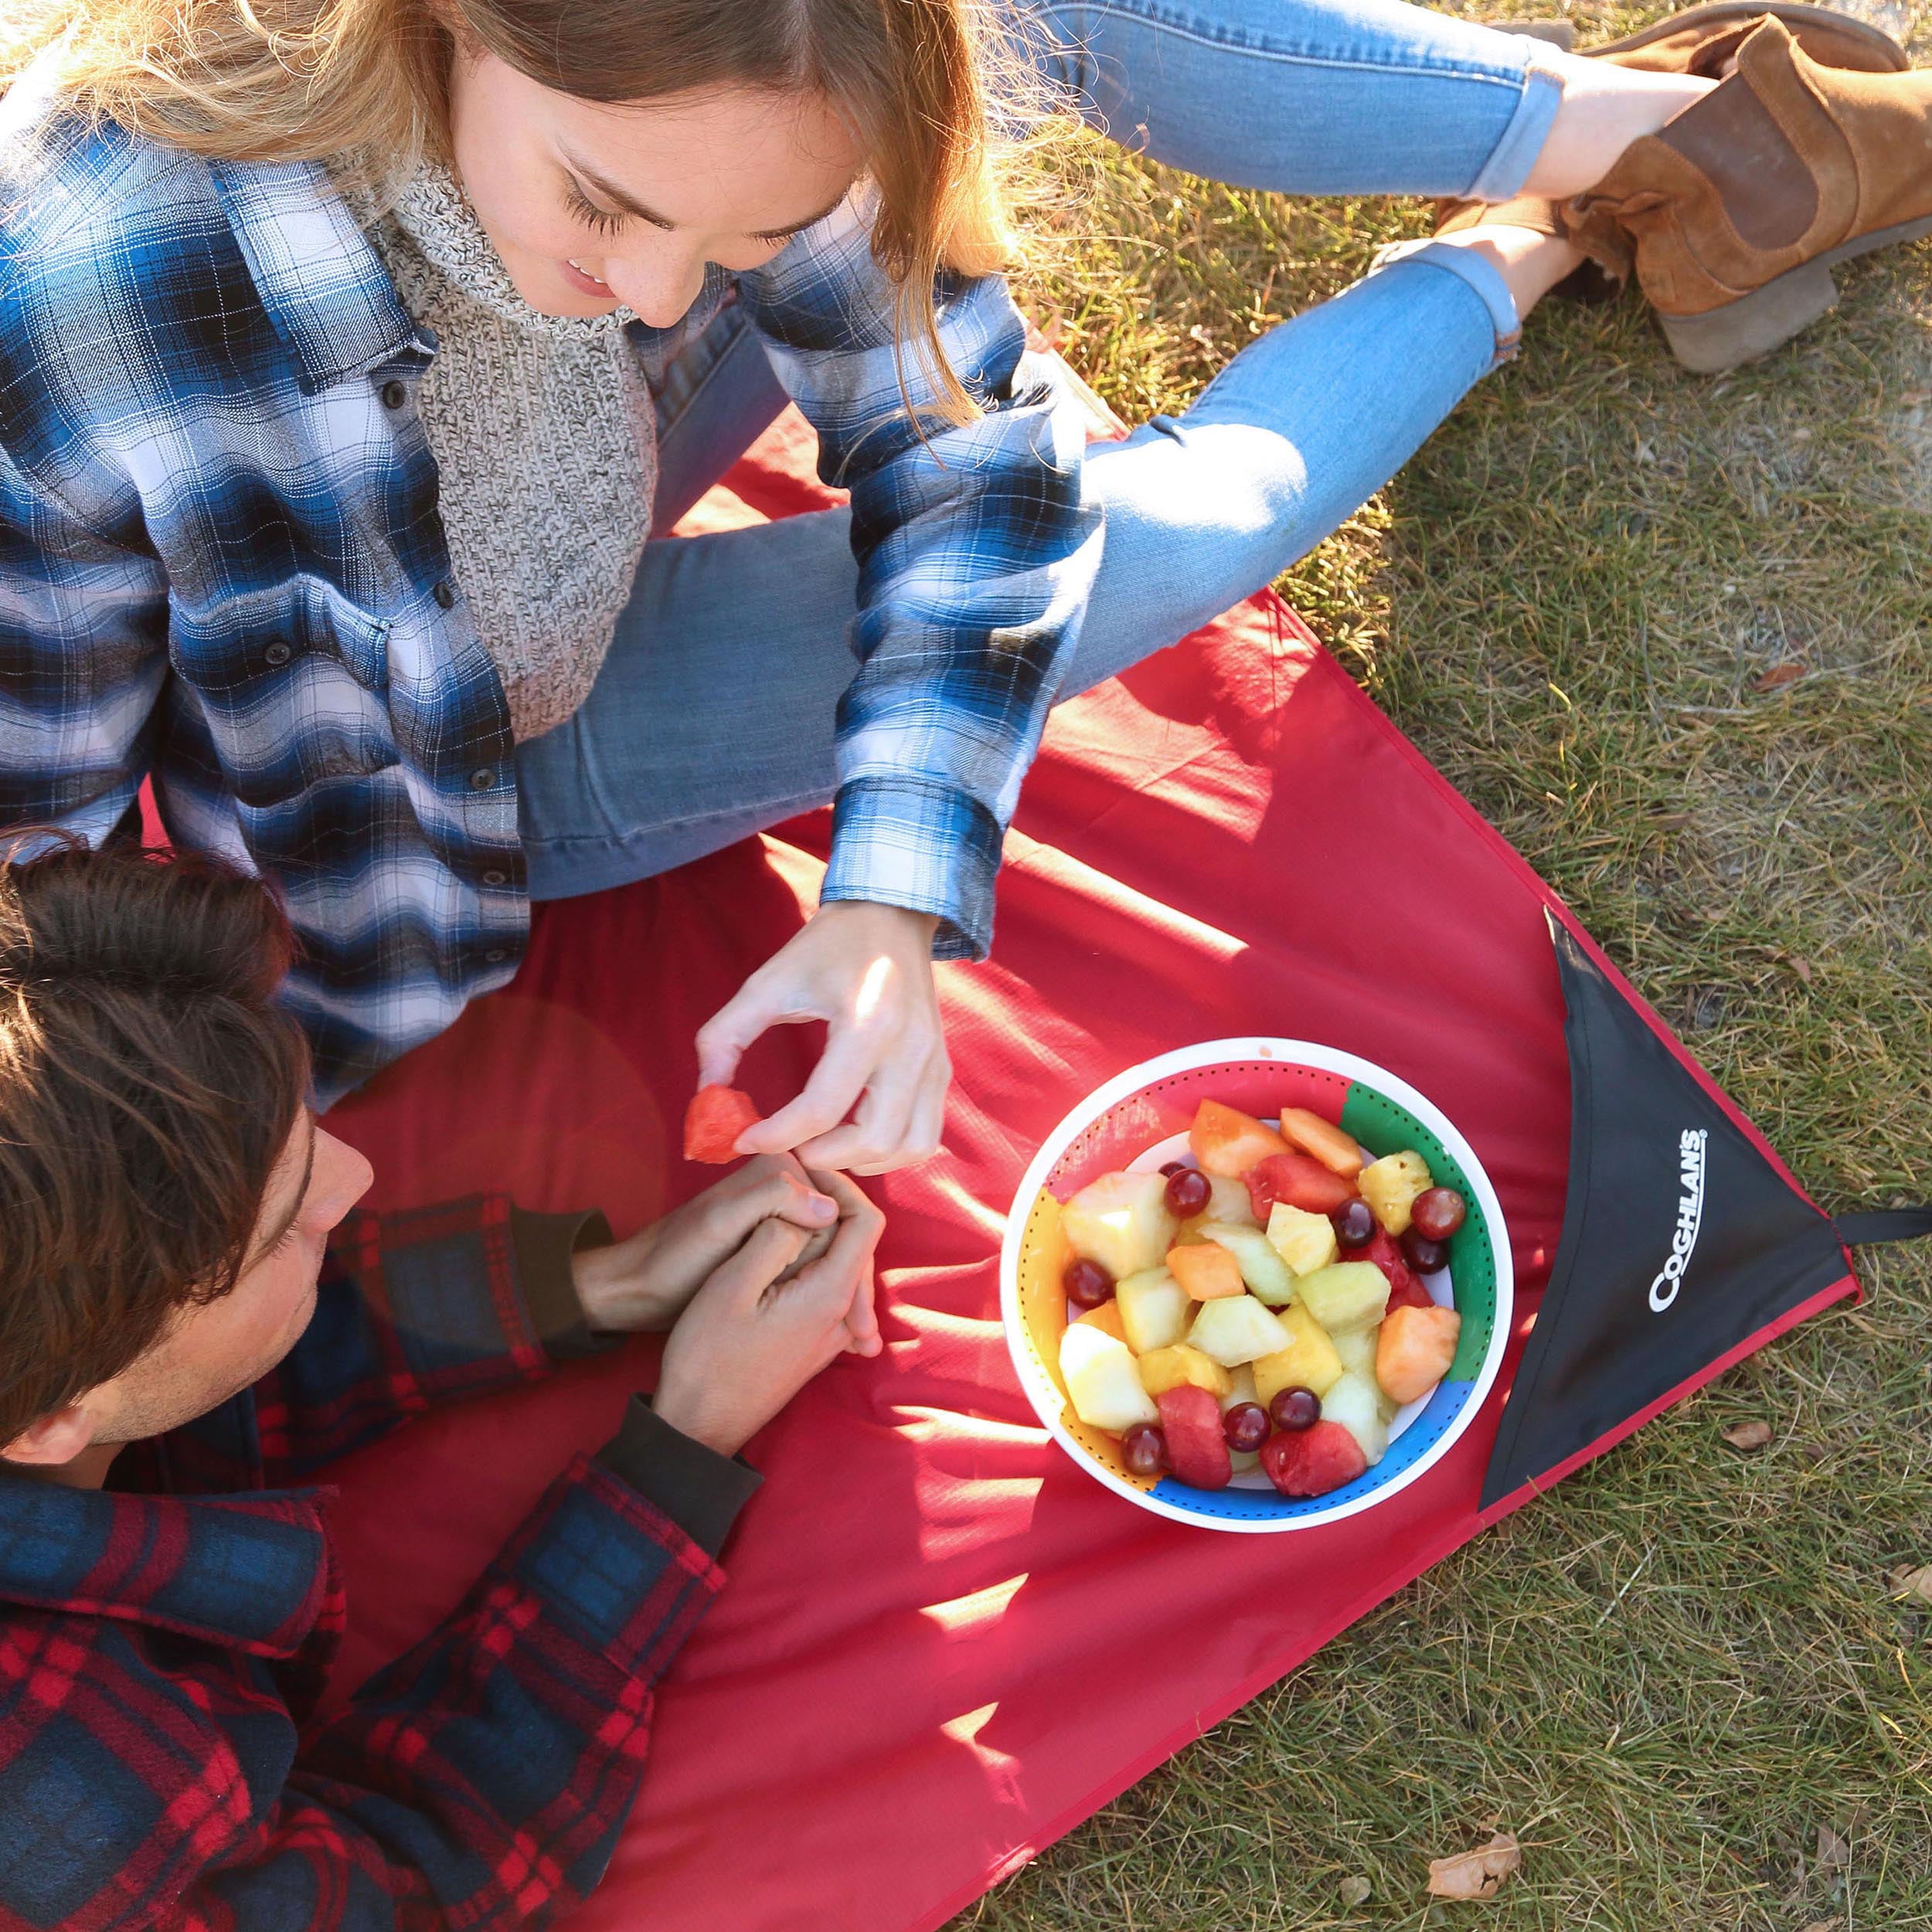 Coghlan's Picnic Blanket 59" x 78.7 Ripstop Polyester with Stuff Sack